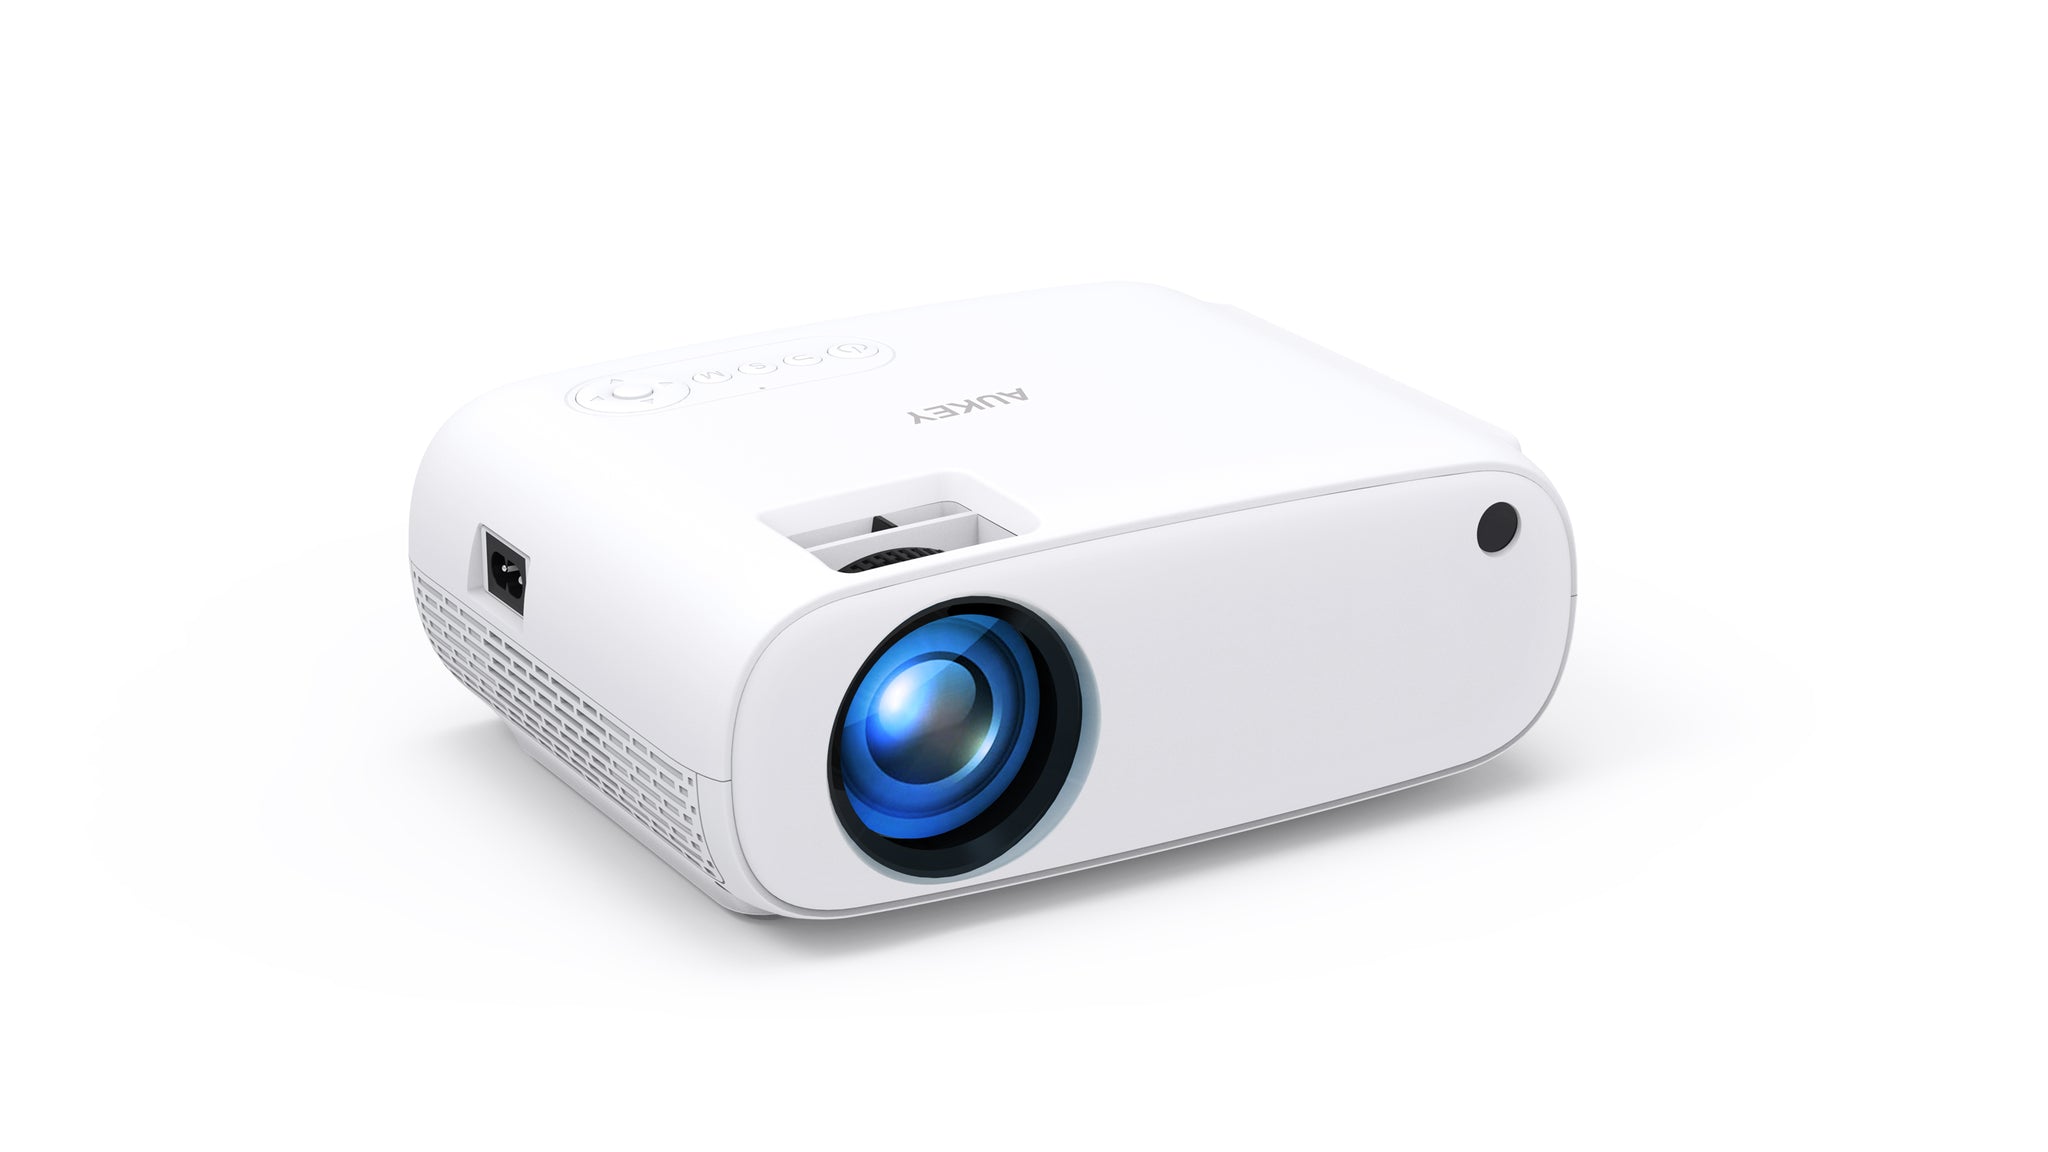 Aukey RD-850 Wireless Wi-Fi Mini Projector with 1080p Resolution